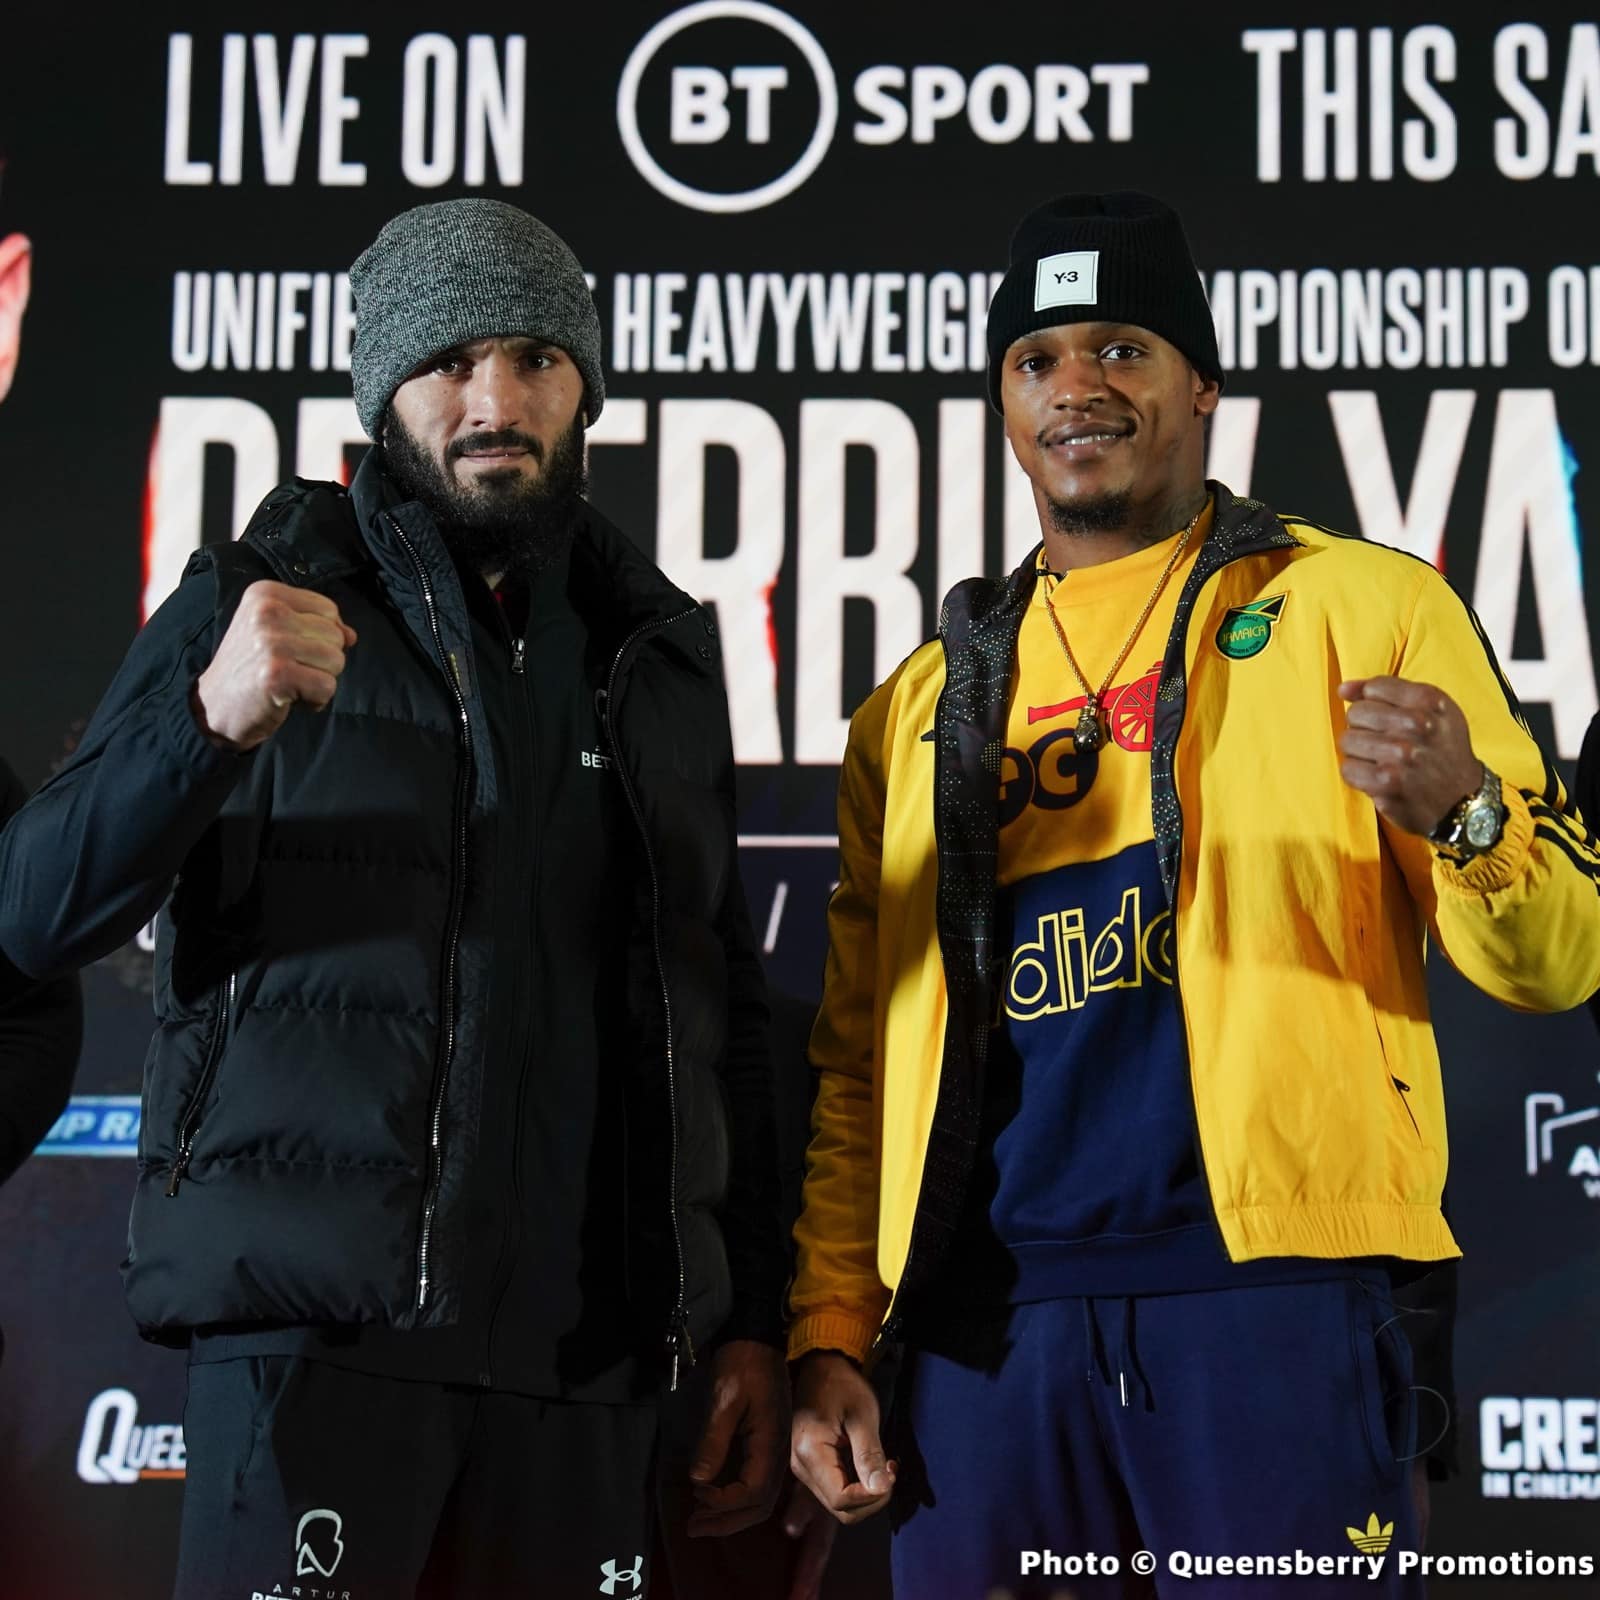 Beterbiev vs. Yarde final press conference for fight on ESPN+ this Saturday at Wembley